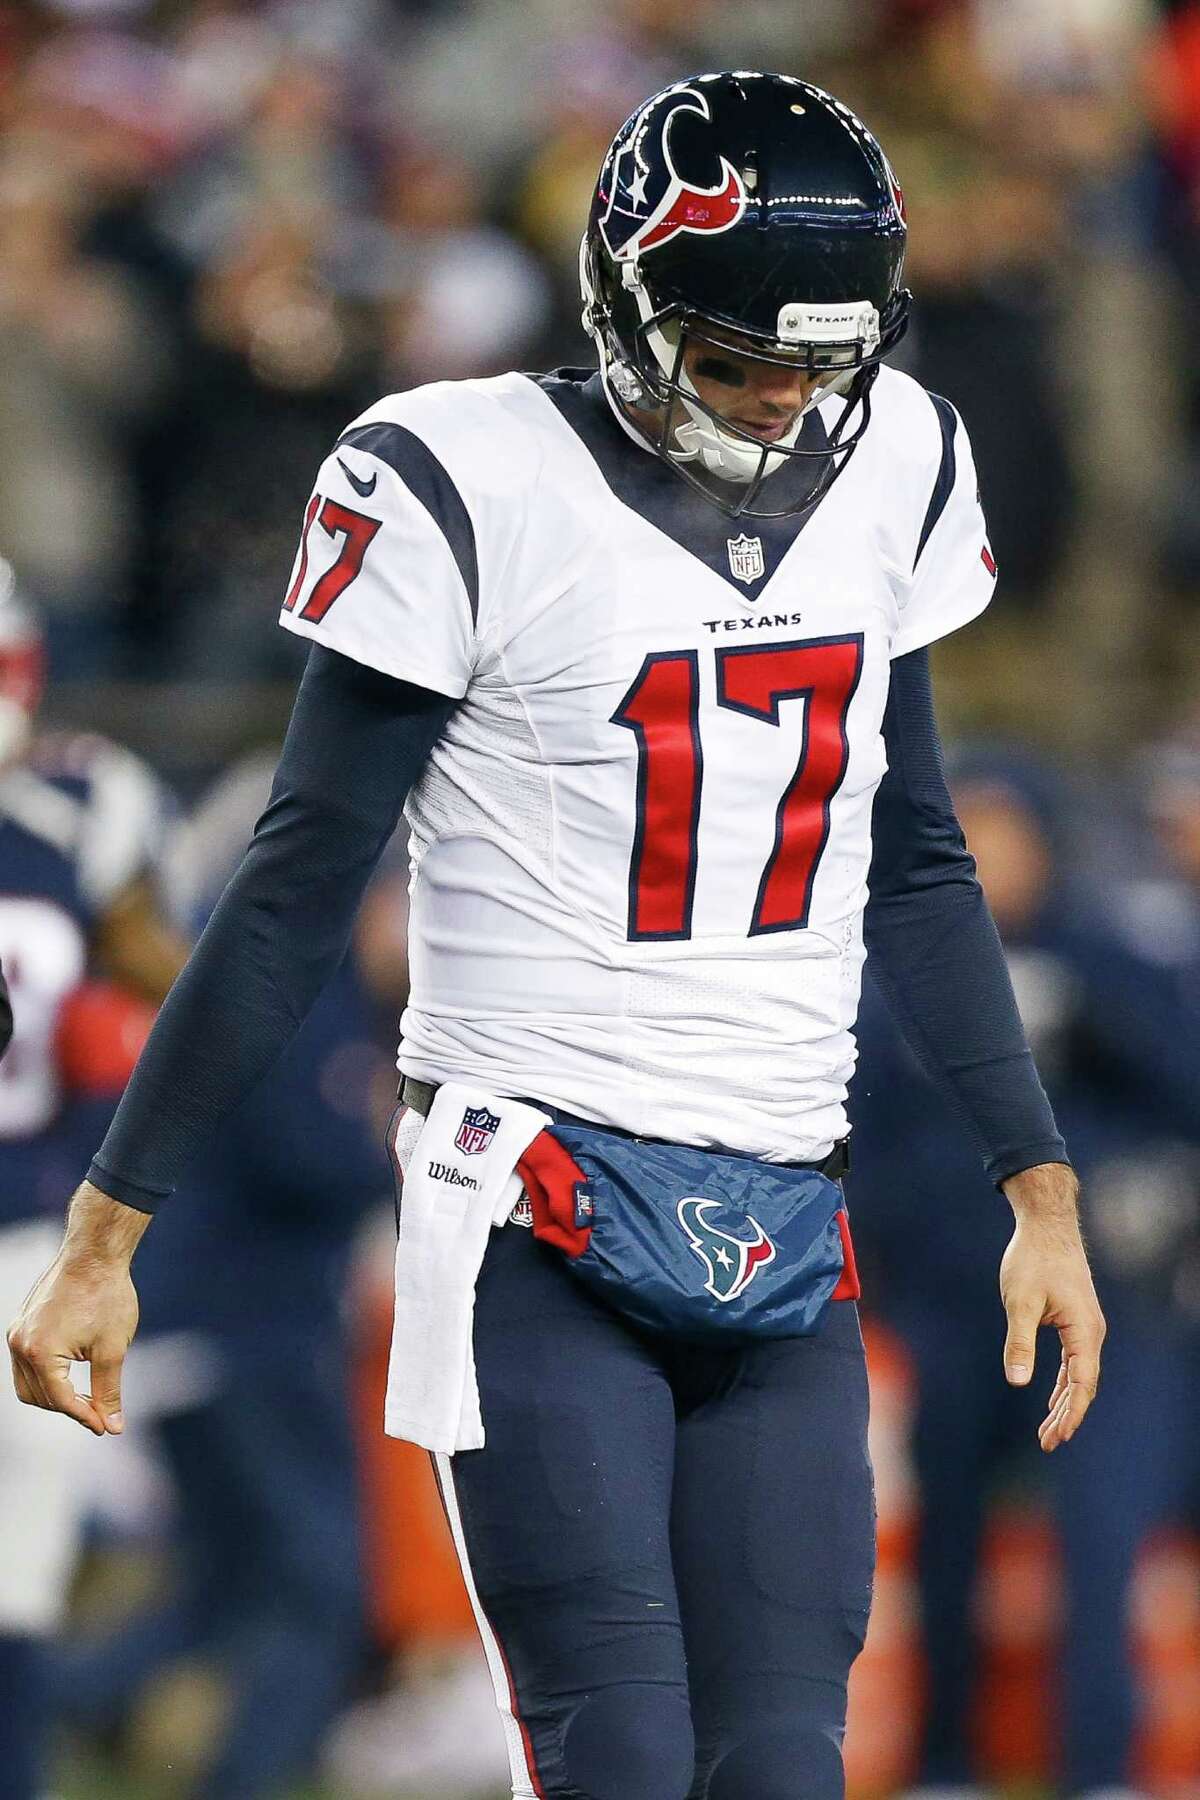 Houston Texans quarterback Brock Osweiler (17) walks off the field during the first quarter of an AFC Divisional Playoff game at Gillette Stadium on Saturday, Jan. 14, 2017, in Foxborough. ( Brett Coomer / Houston Chronicle )